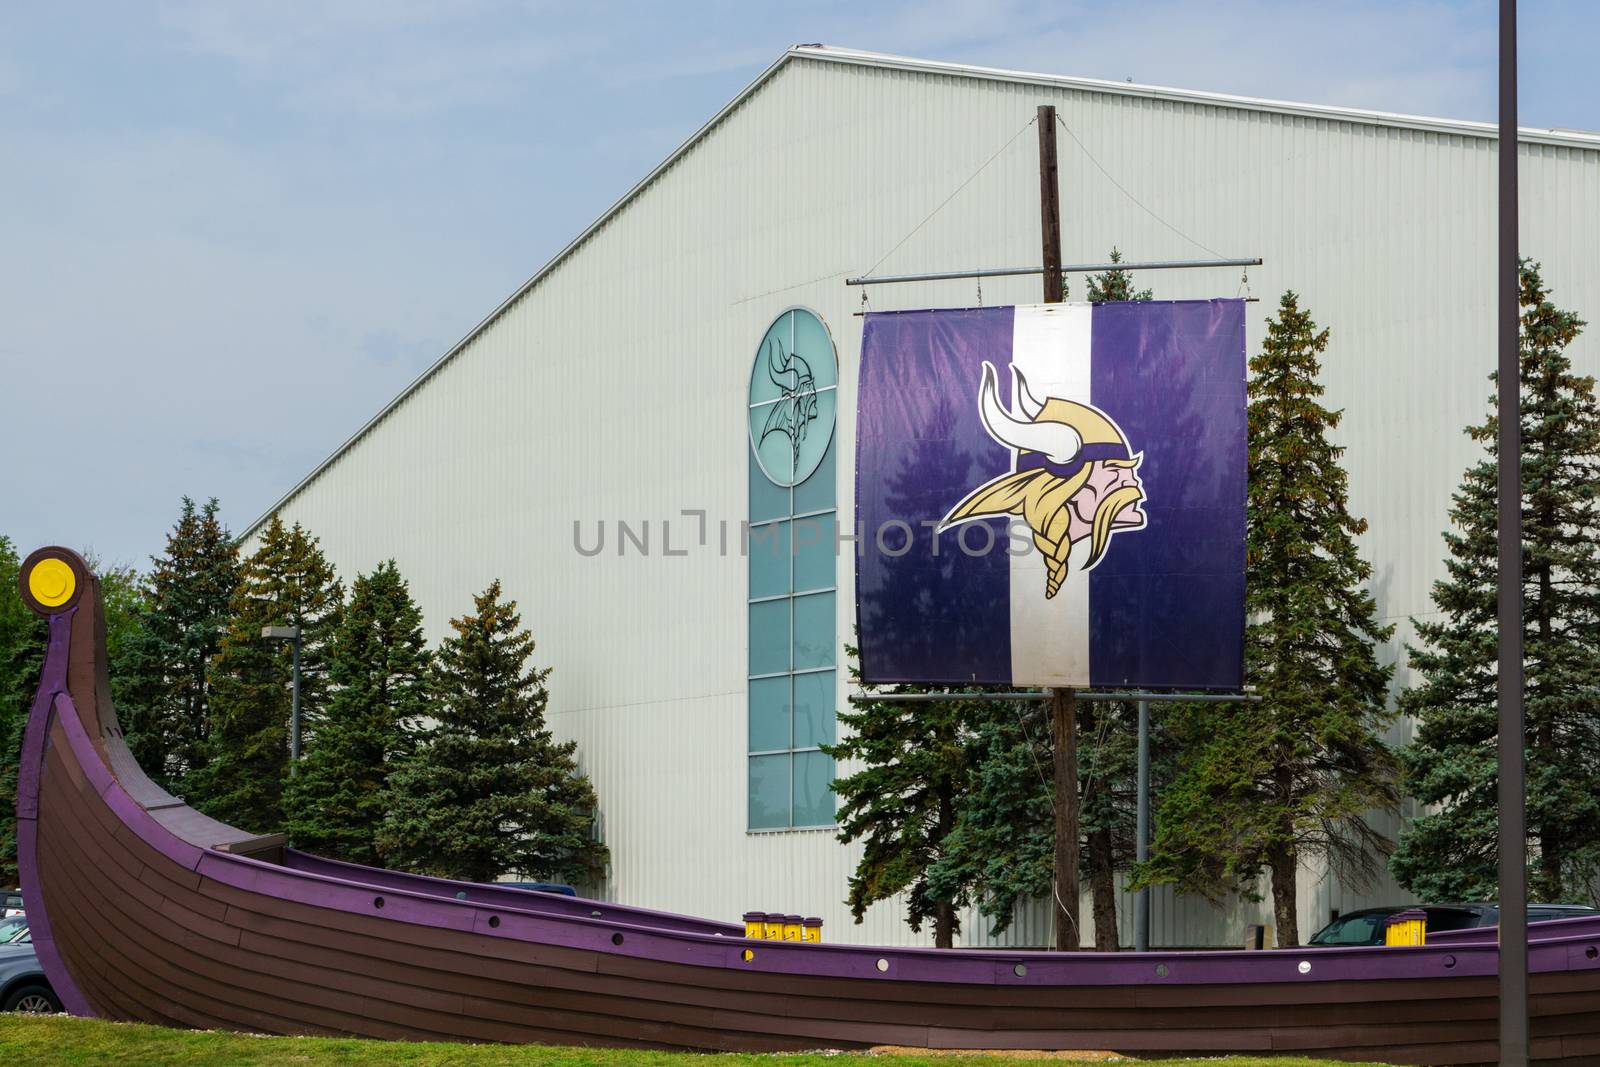 Minnesota Vikings Practice Facility and Flag by wolterk